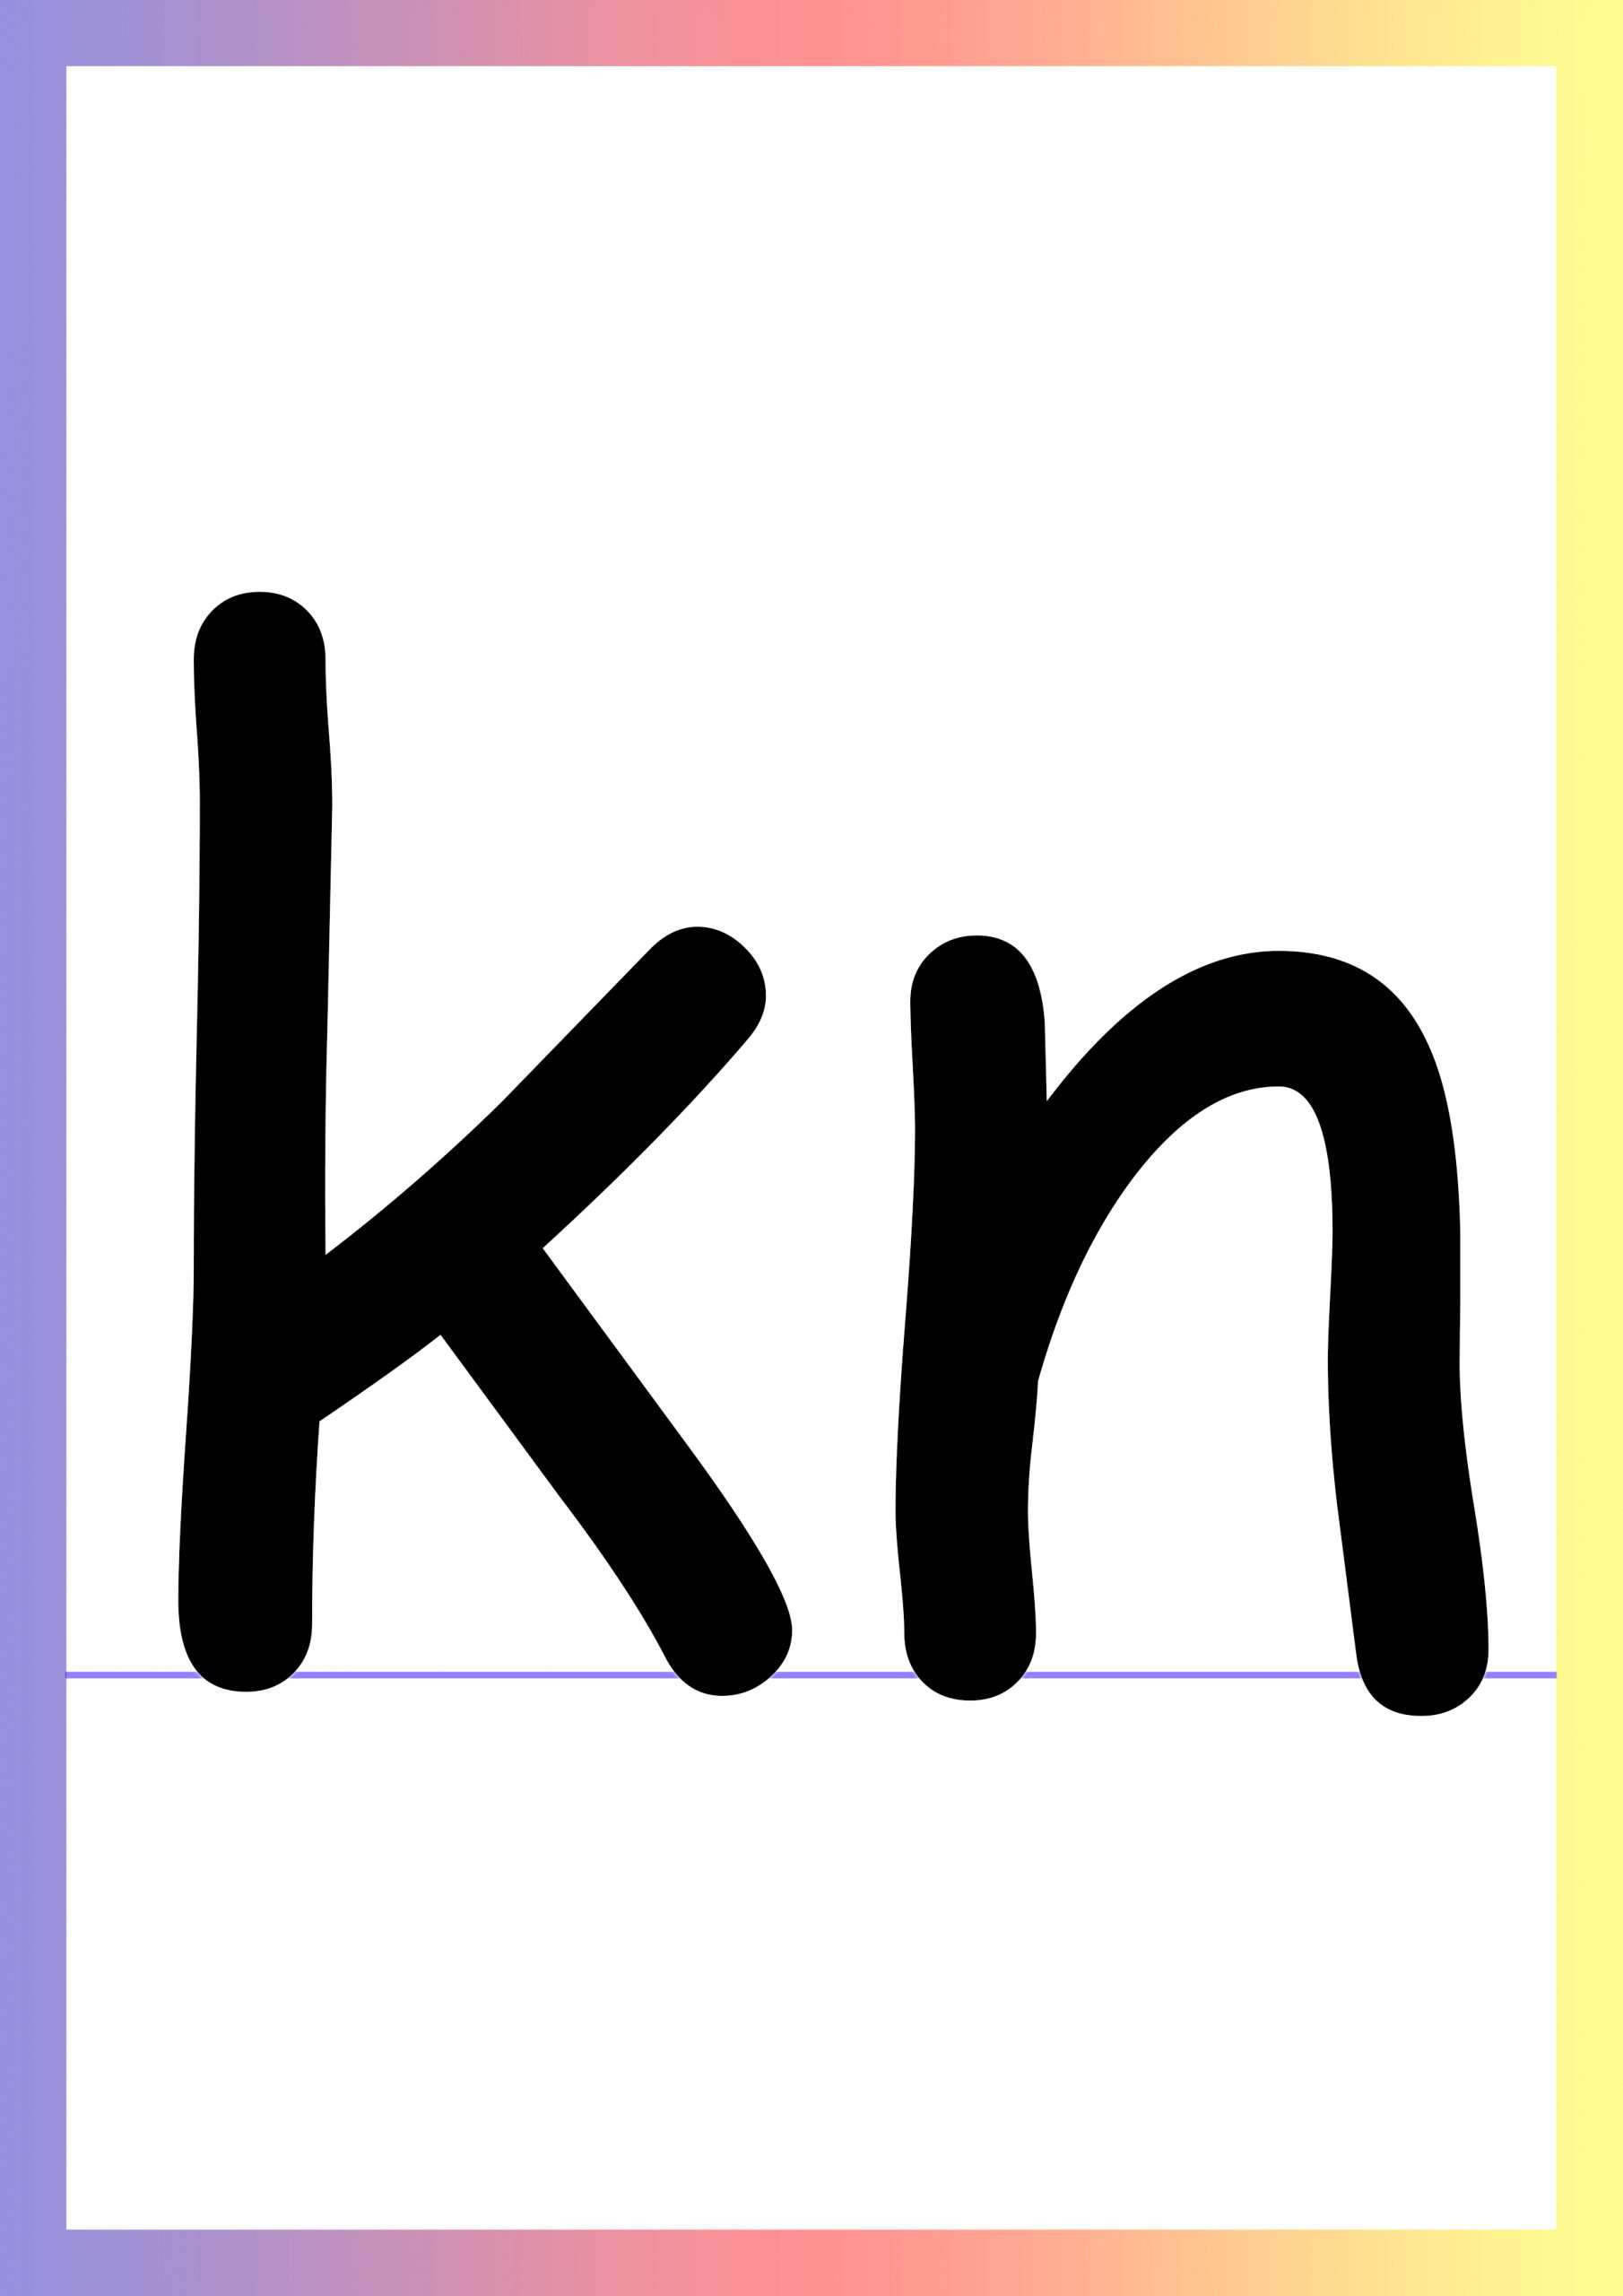 flashcards digraph consonant step kn phonics digraphs level would guide teach